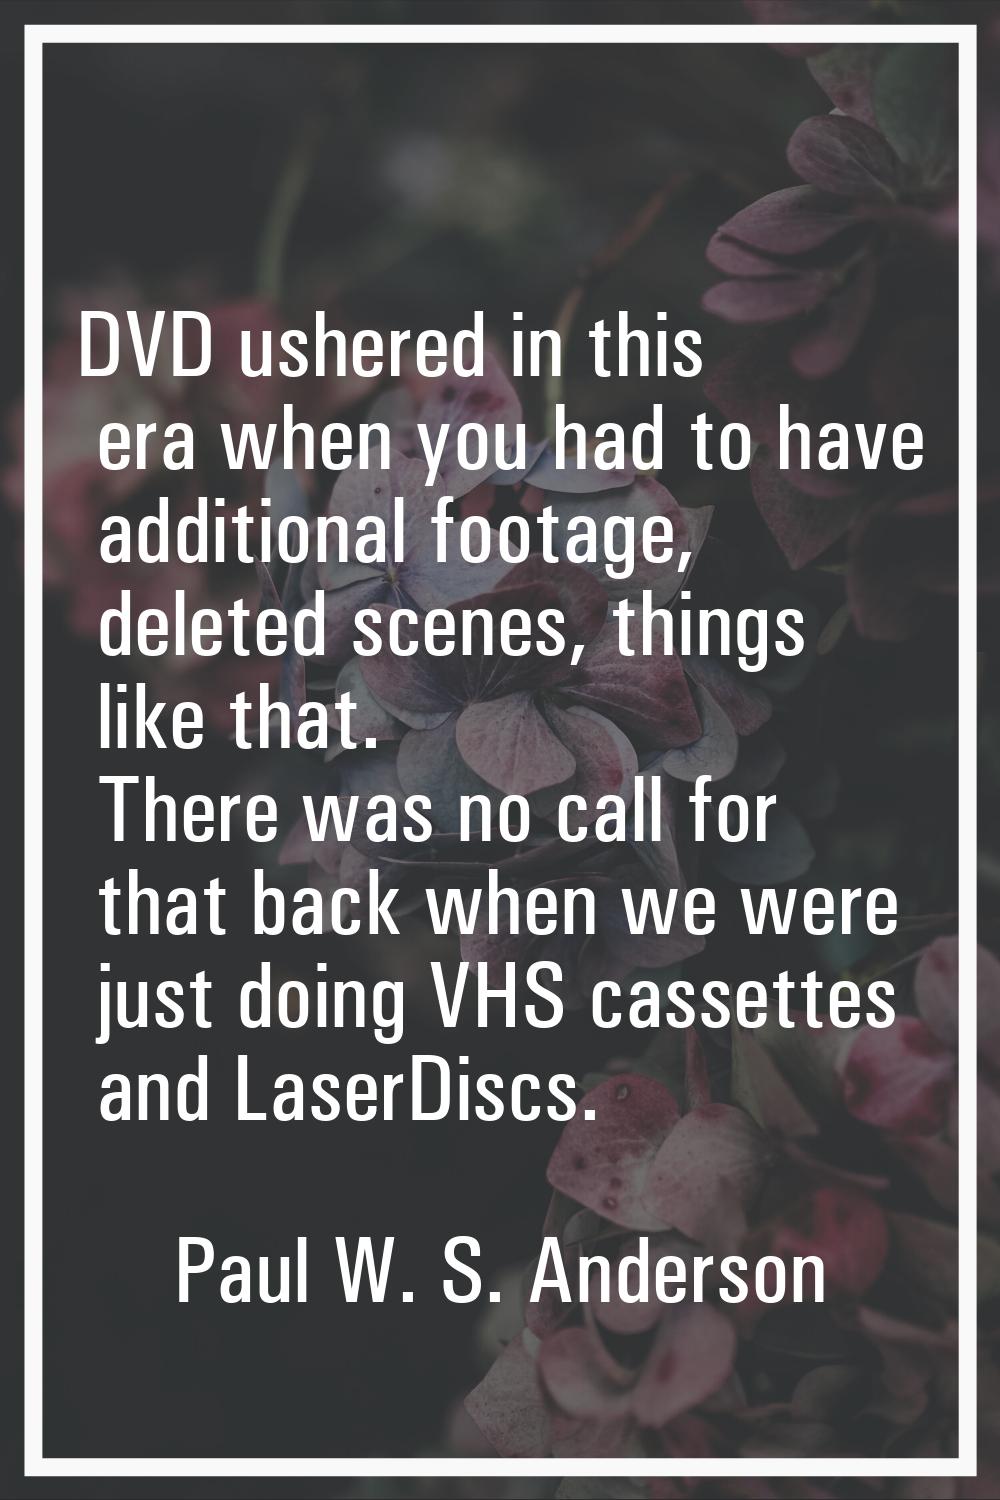 DVD ushered in this era when you had to have additional footage, deleted scenes, things like that. 